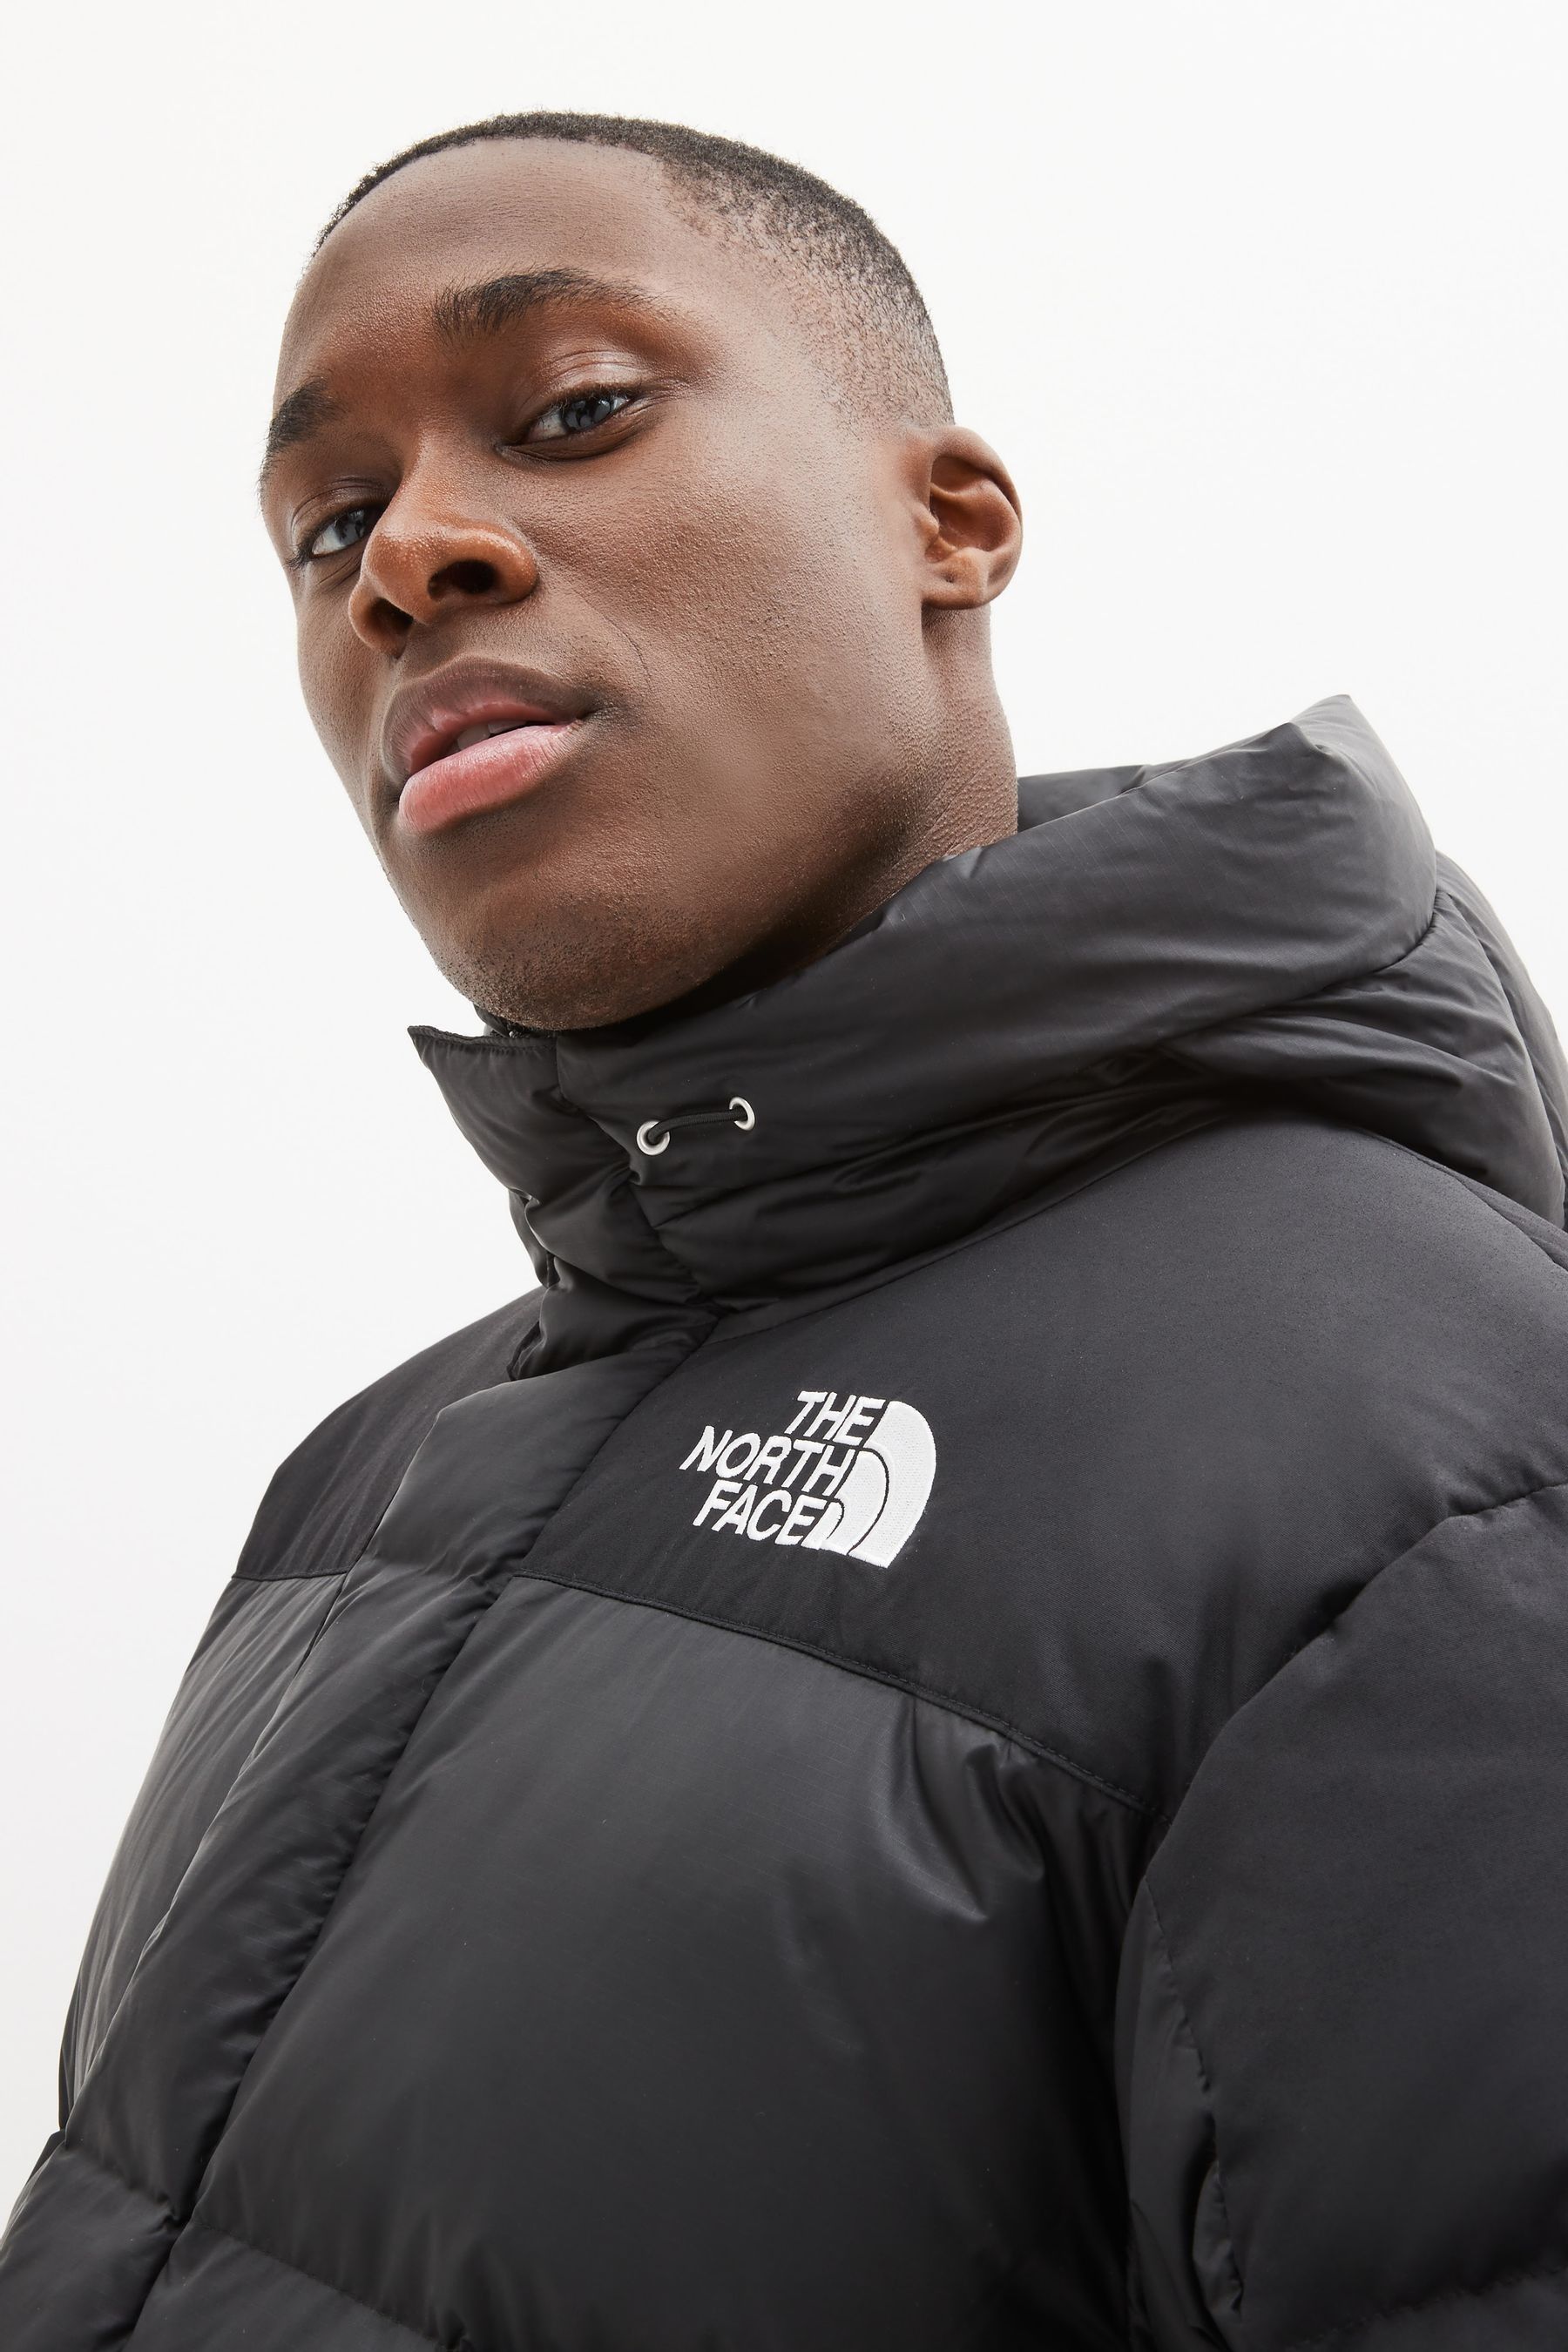 Buy The North Face Himalayan Down Parka Jacket from the Next UK online shop